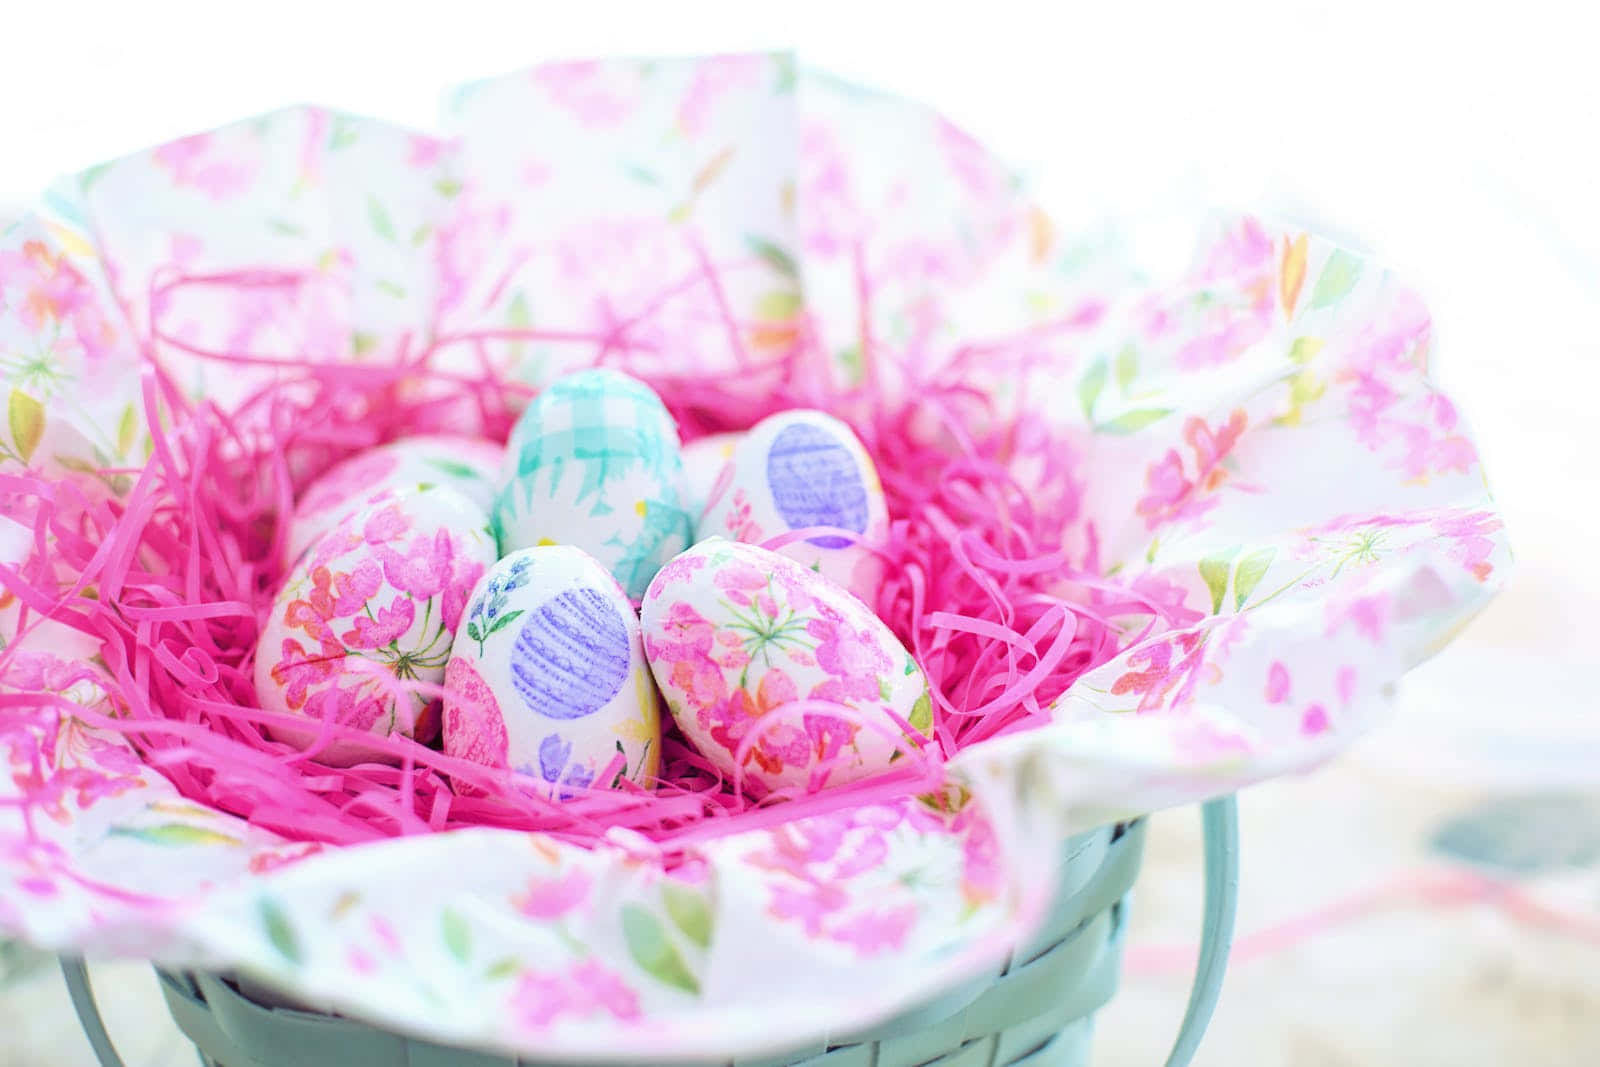 Celebrate this colorful Easter with this beautiful, pastel egg decoration Wallpaper